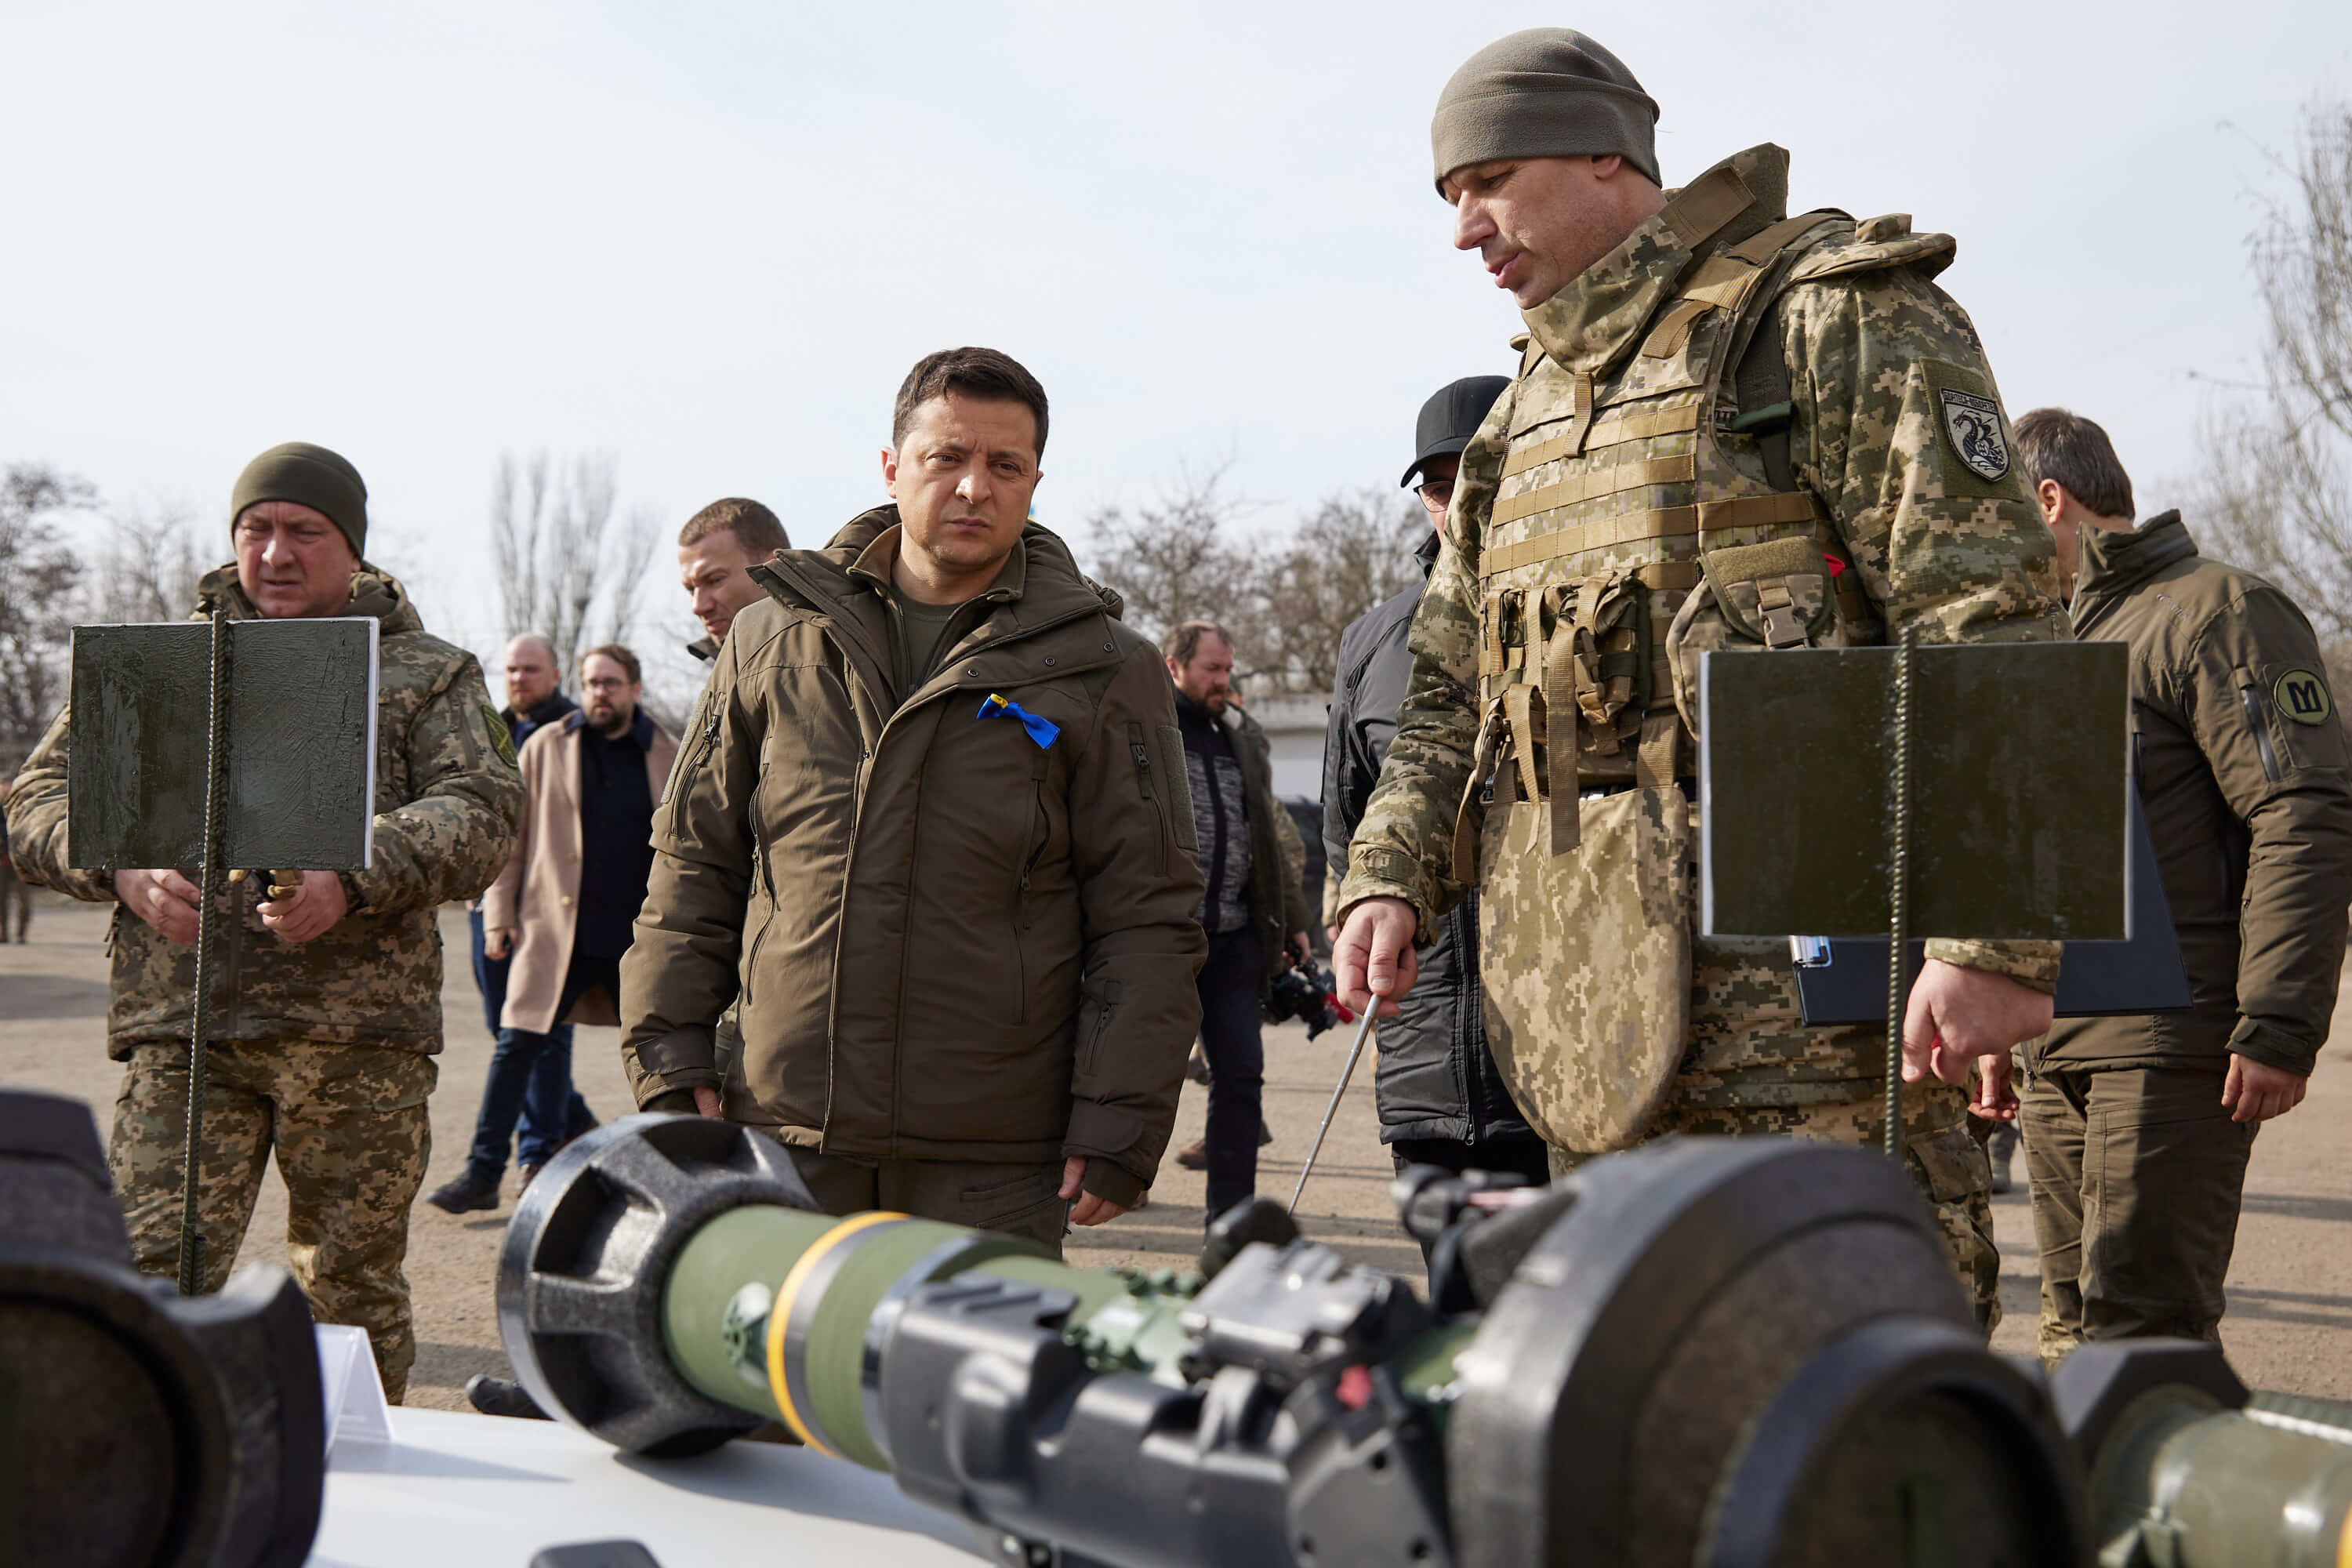  Ukrainian President Volodymyr Zelenskiy inspects Javelin anti-tank missiles and launchers provided by the U.S army on February 17, 2022. REUTERS .jpeg